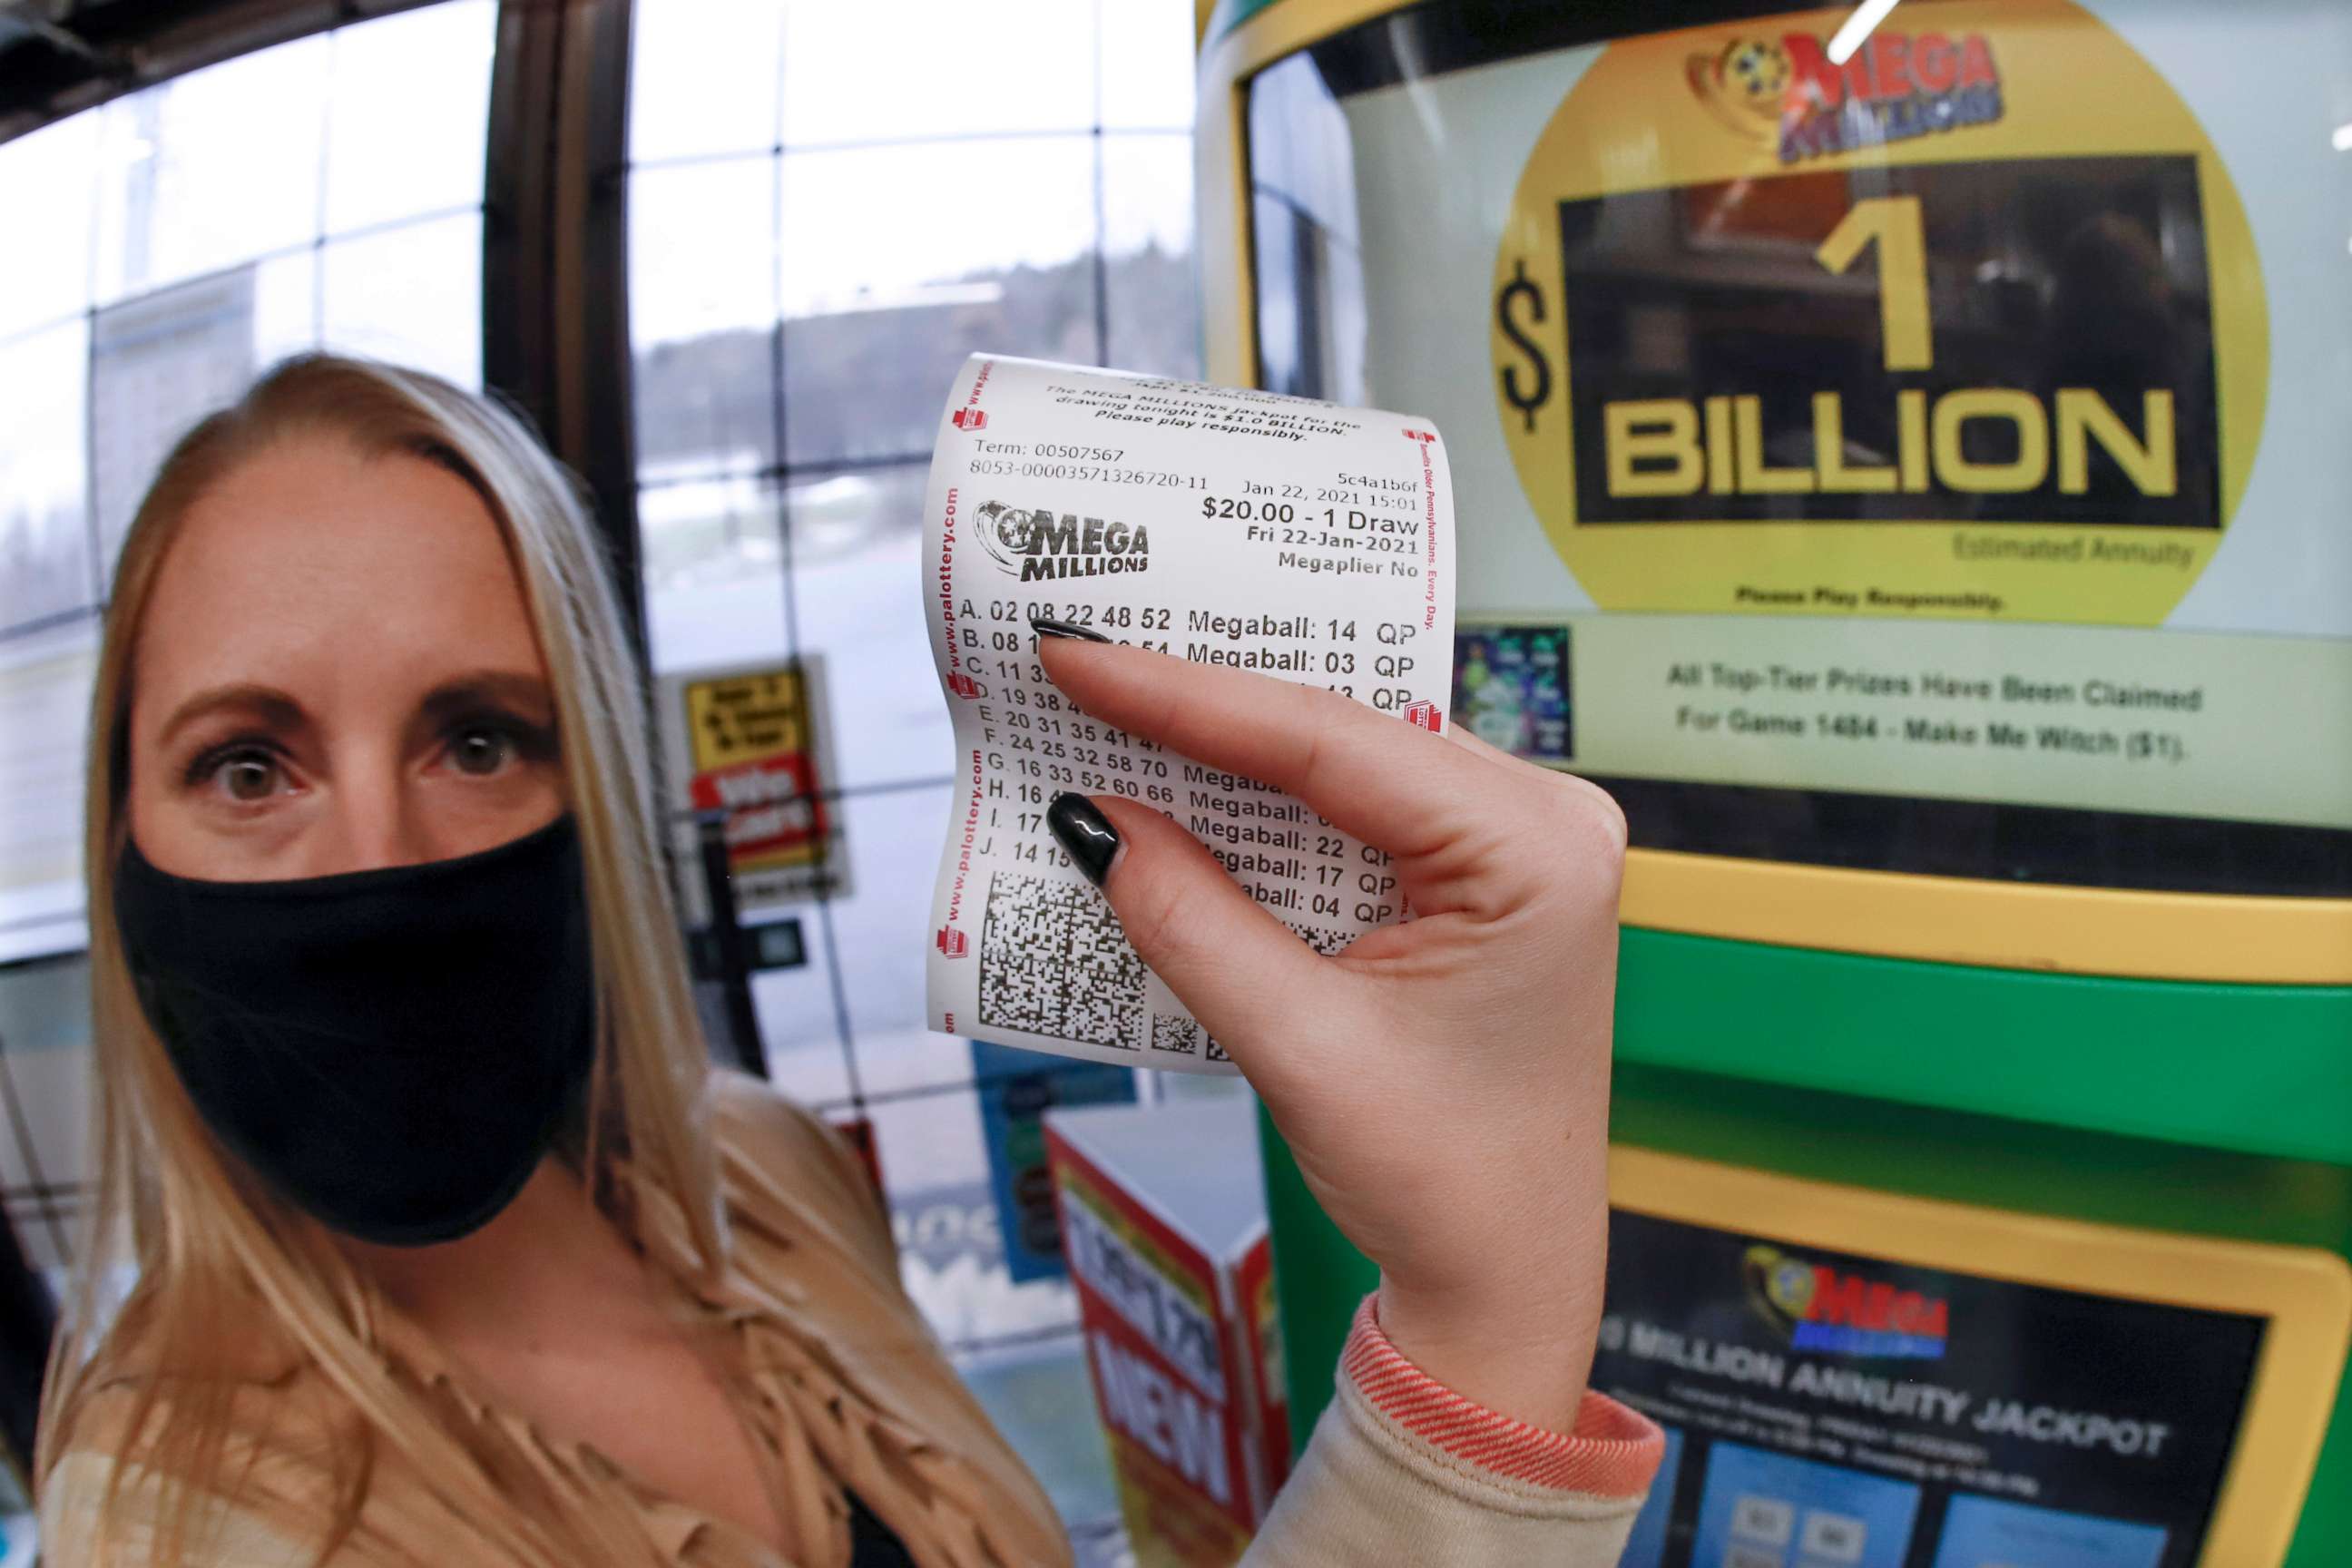 PHOTO: A patron, who did not want to give her name, shows the ticket she had just purchased for the Mega Millions lottery drawing at the lottery ticket vending kiosk in a Smoker Friendly store, Friday, Jan. 22, 2021, in Cranberry Township, Pa.